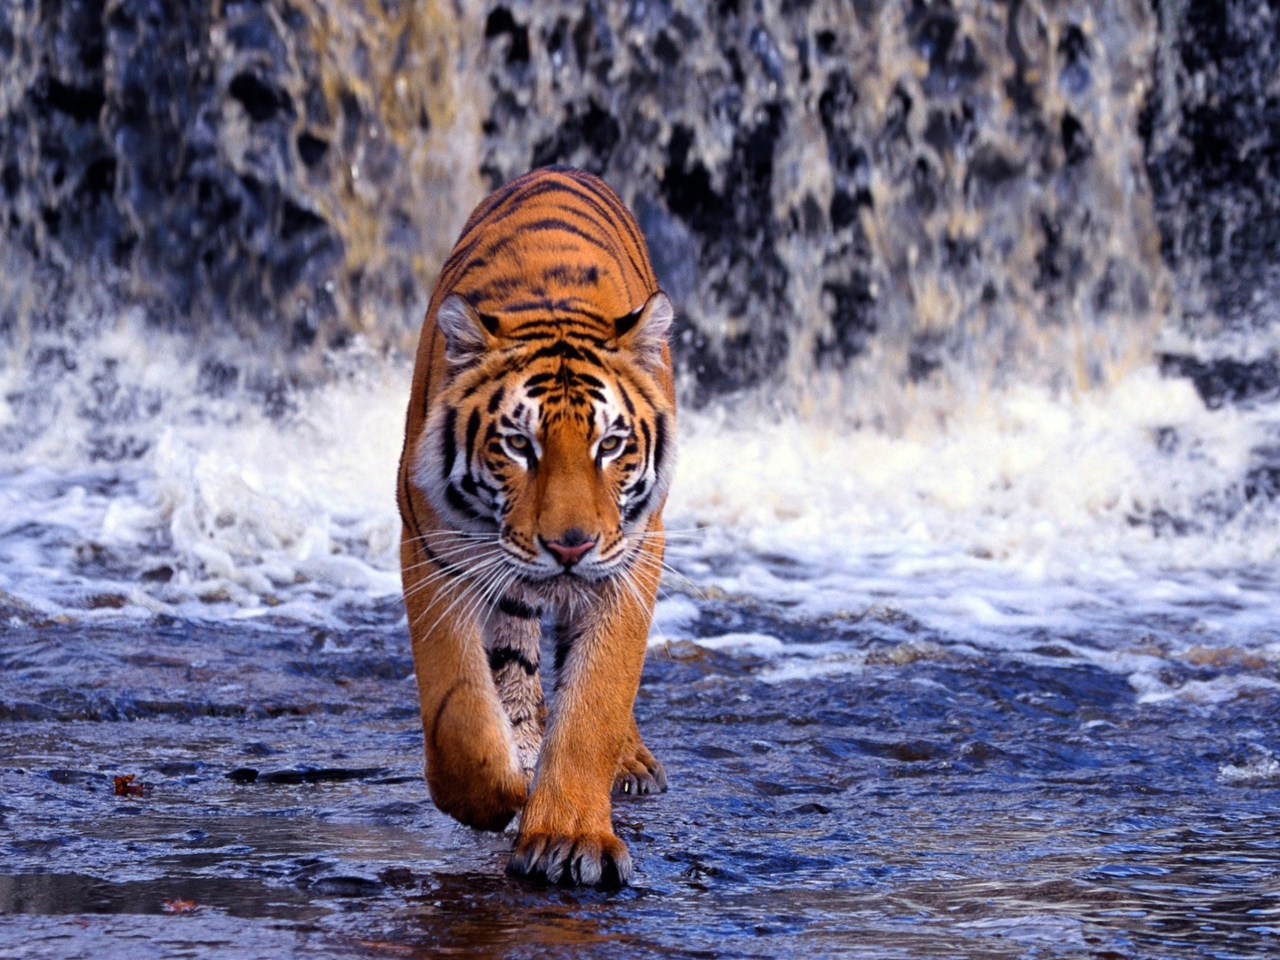 Tiger And Waterfall wallpaper 1280x960